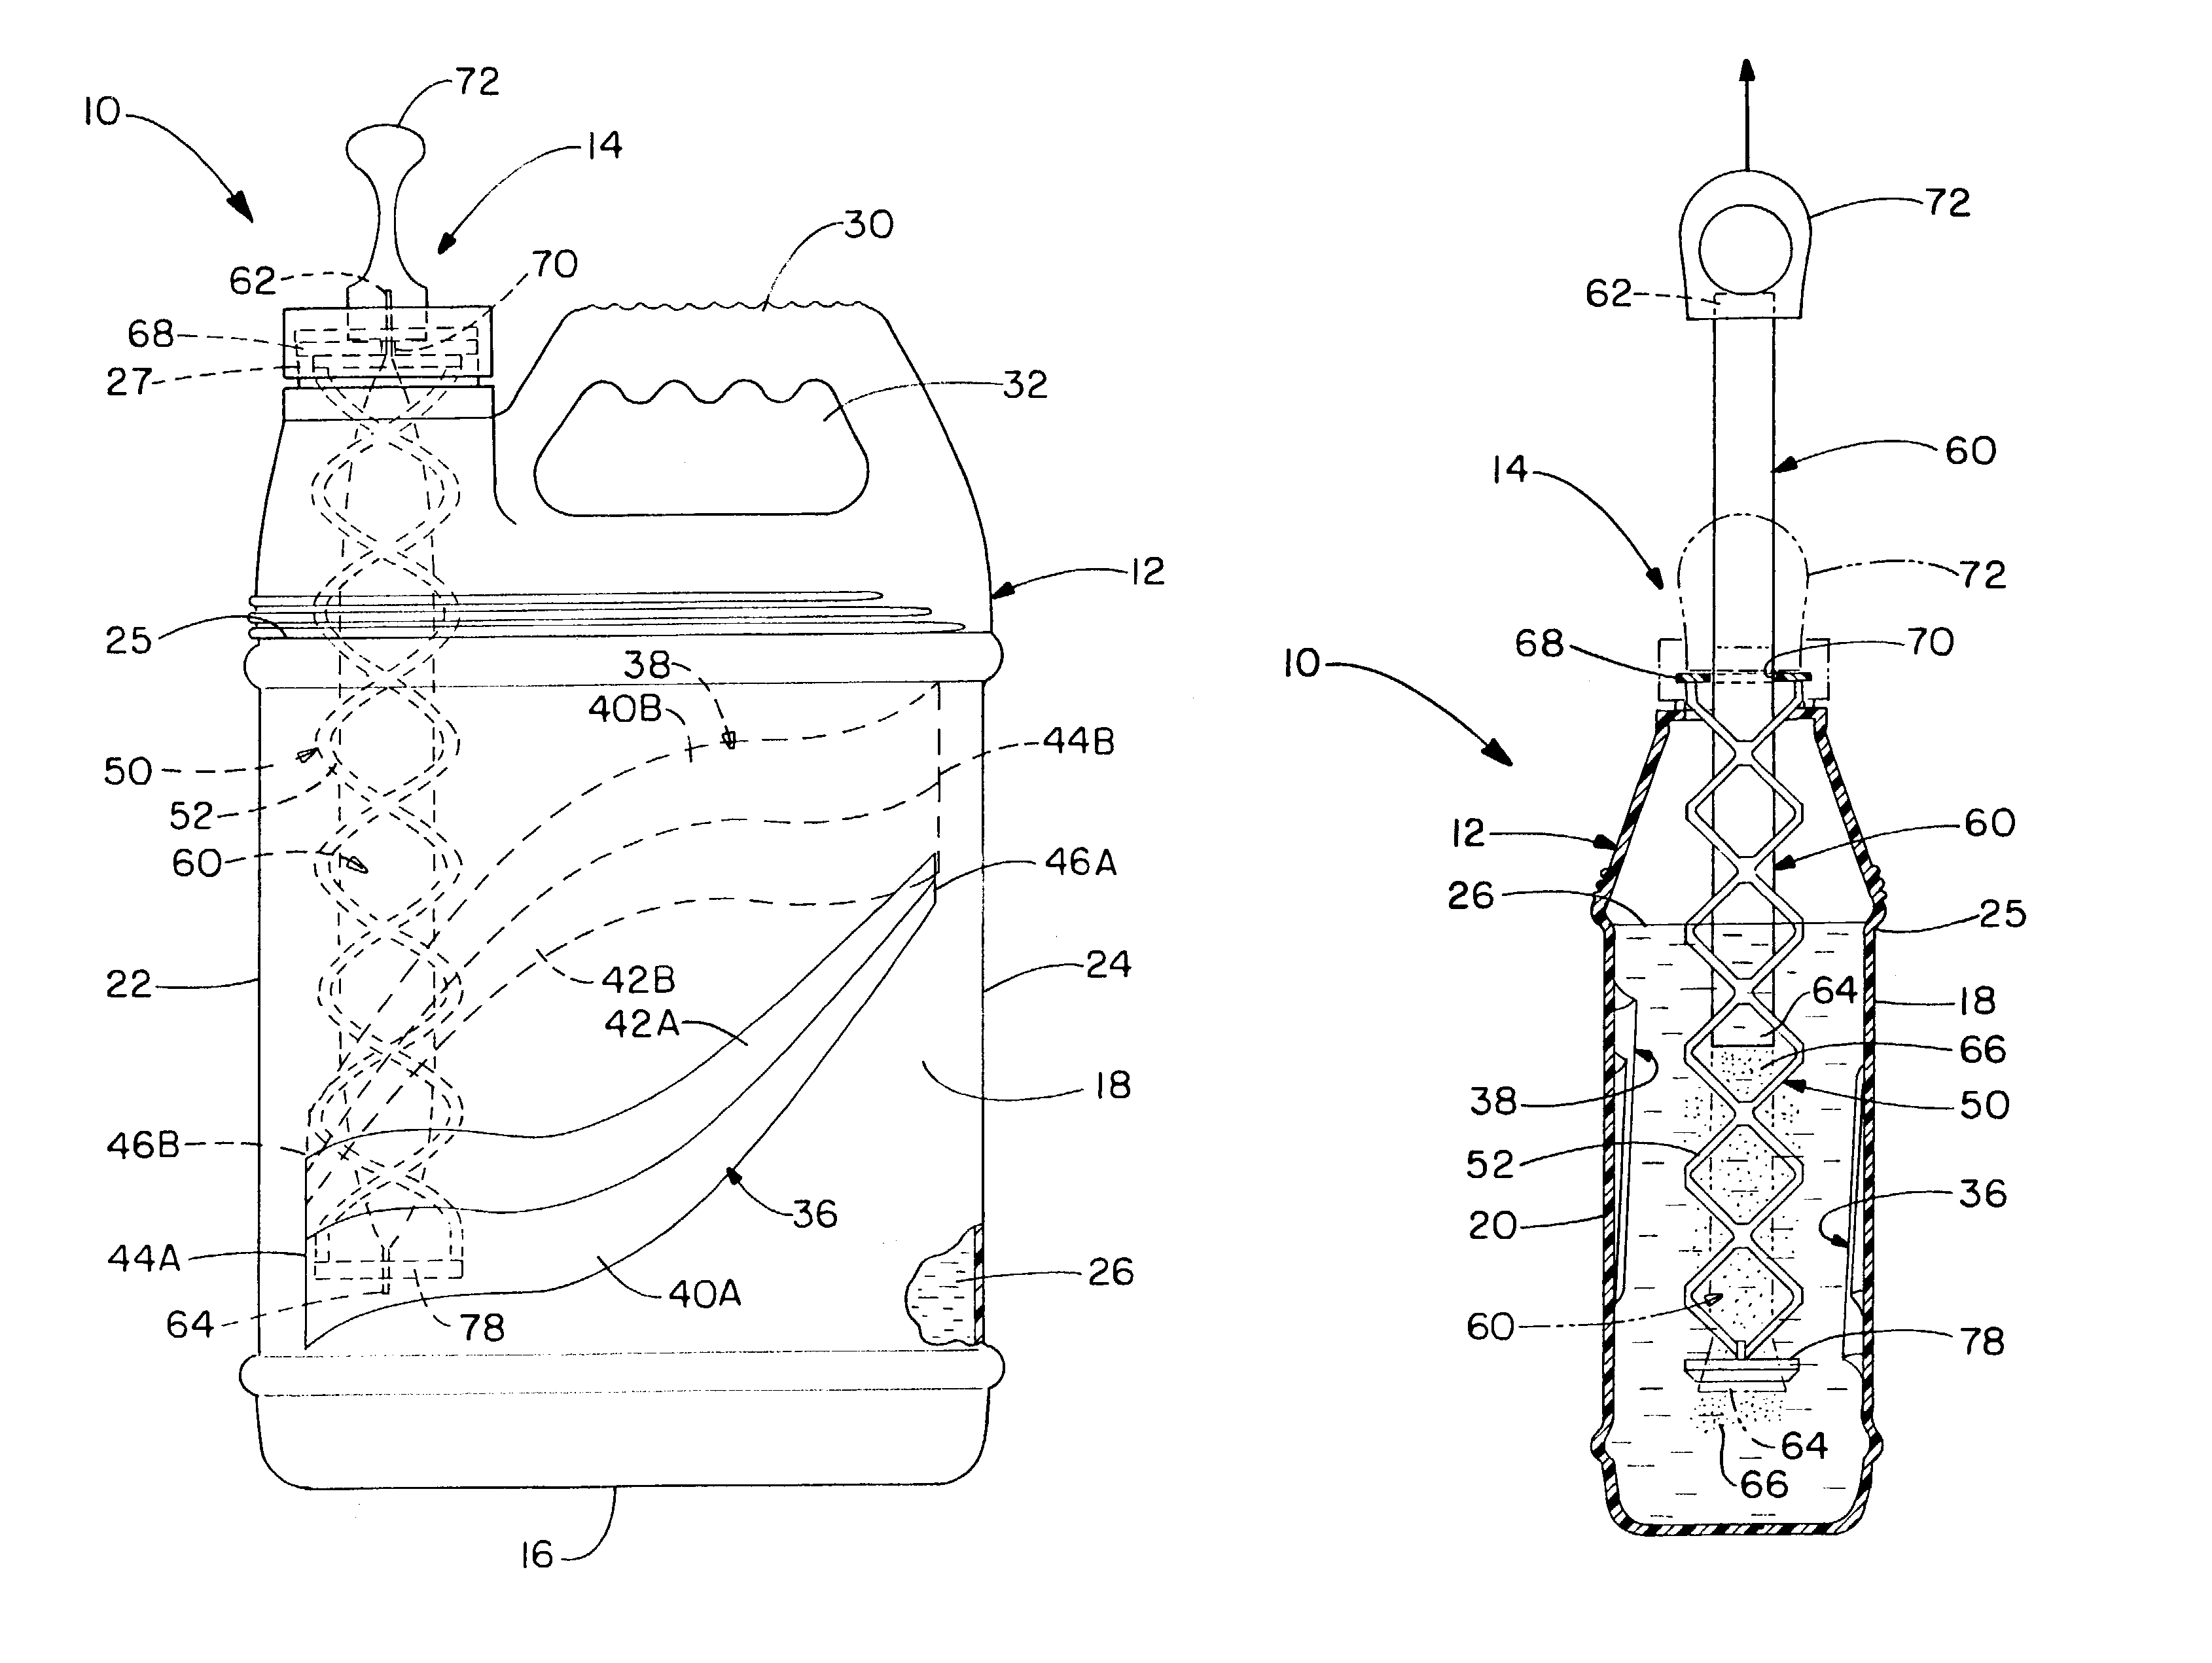 Paint container and colorant injector apparatus and method